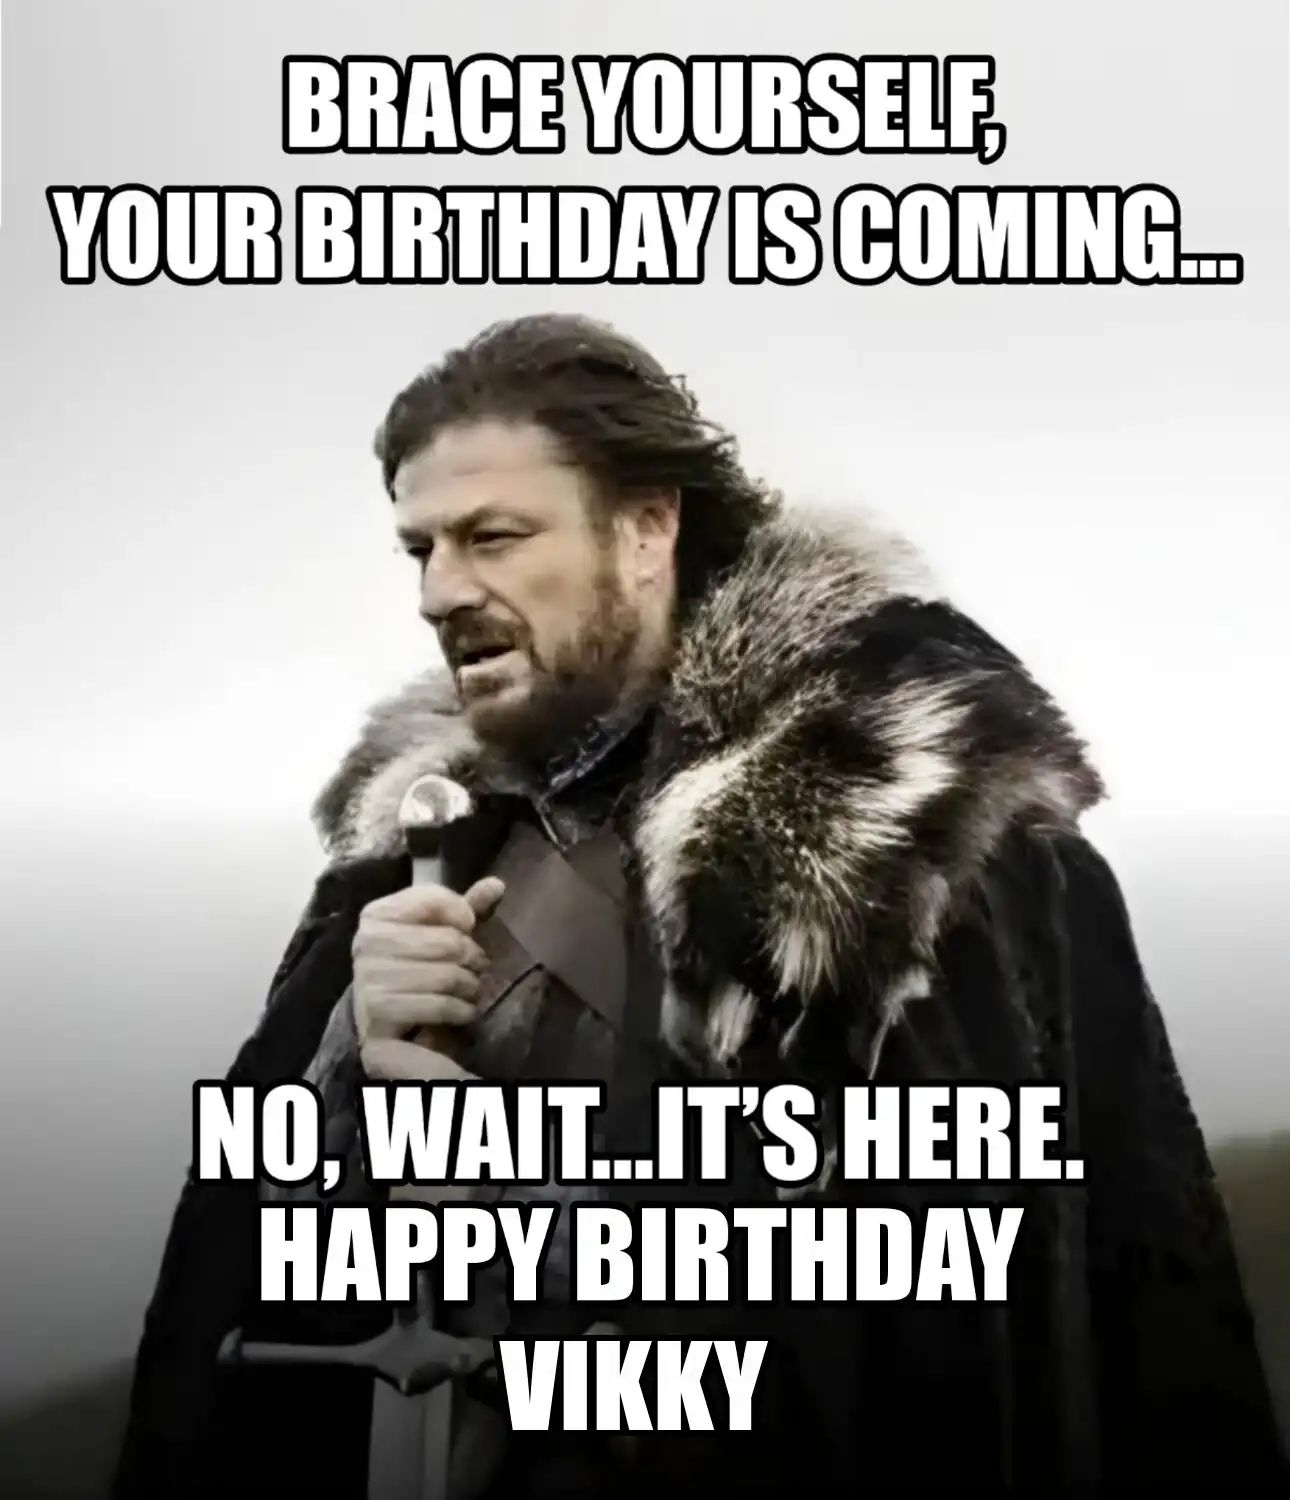 Happy Birthday Vikky Brace Yourself Your Birthday Is Coming Meme